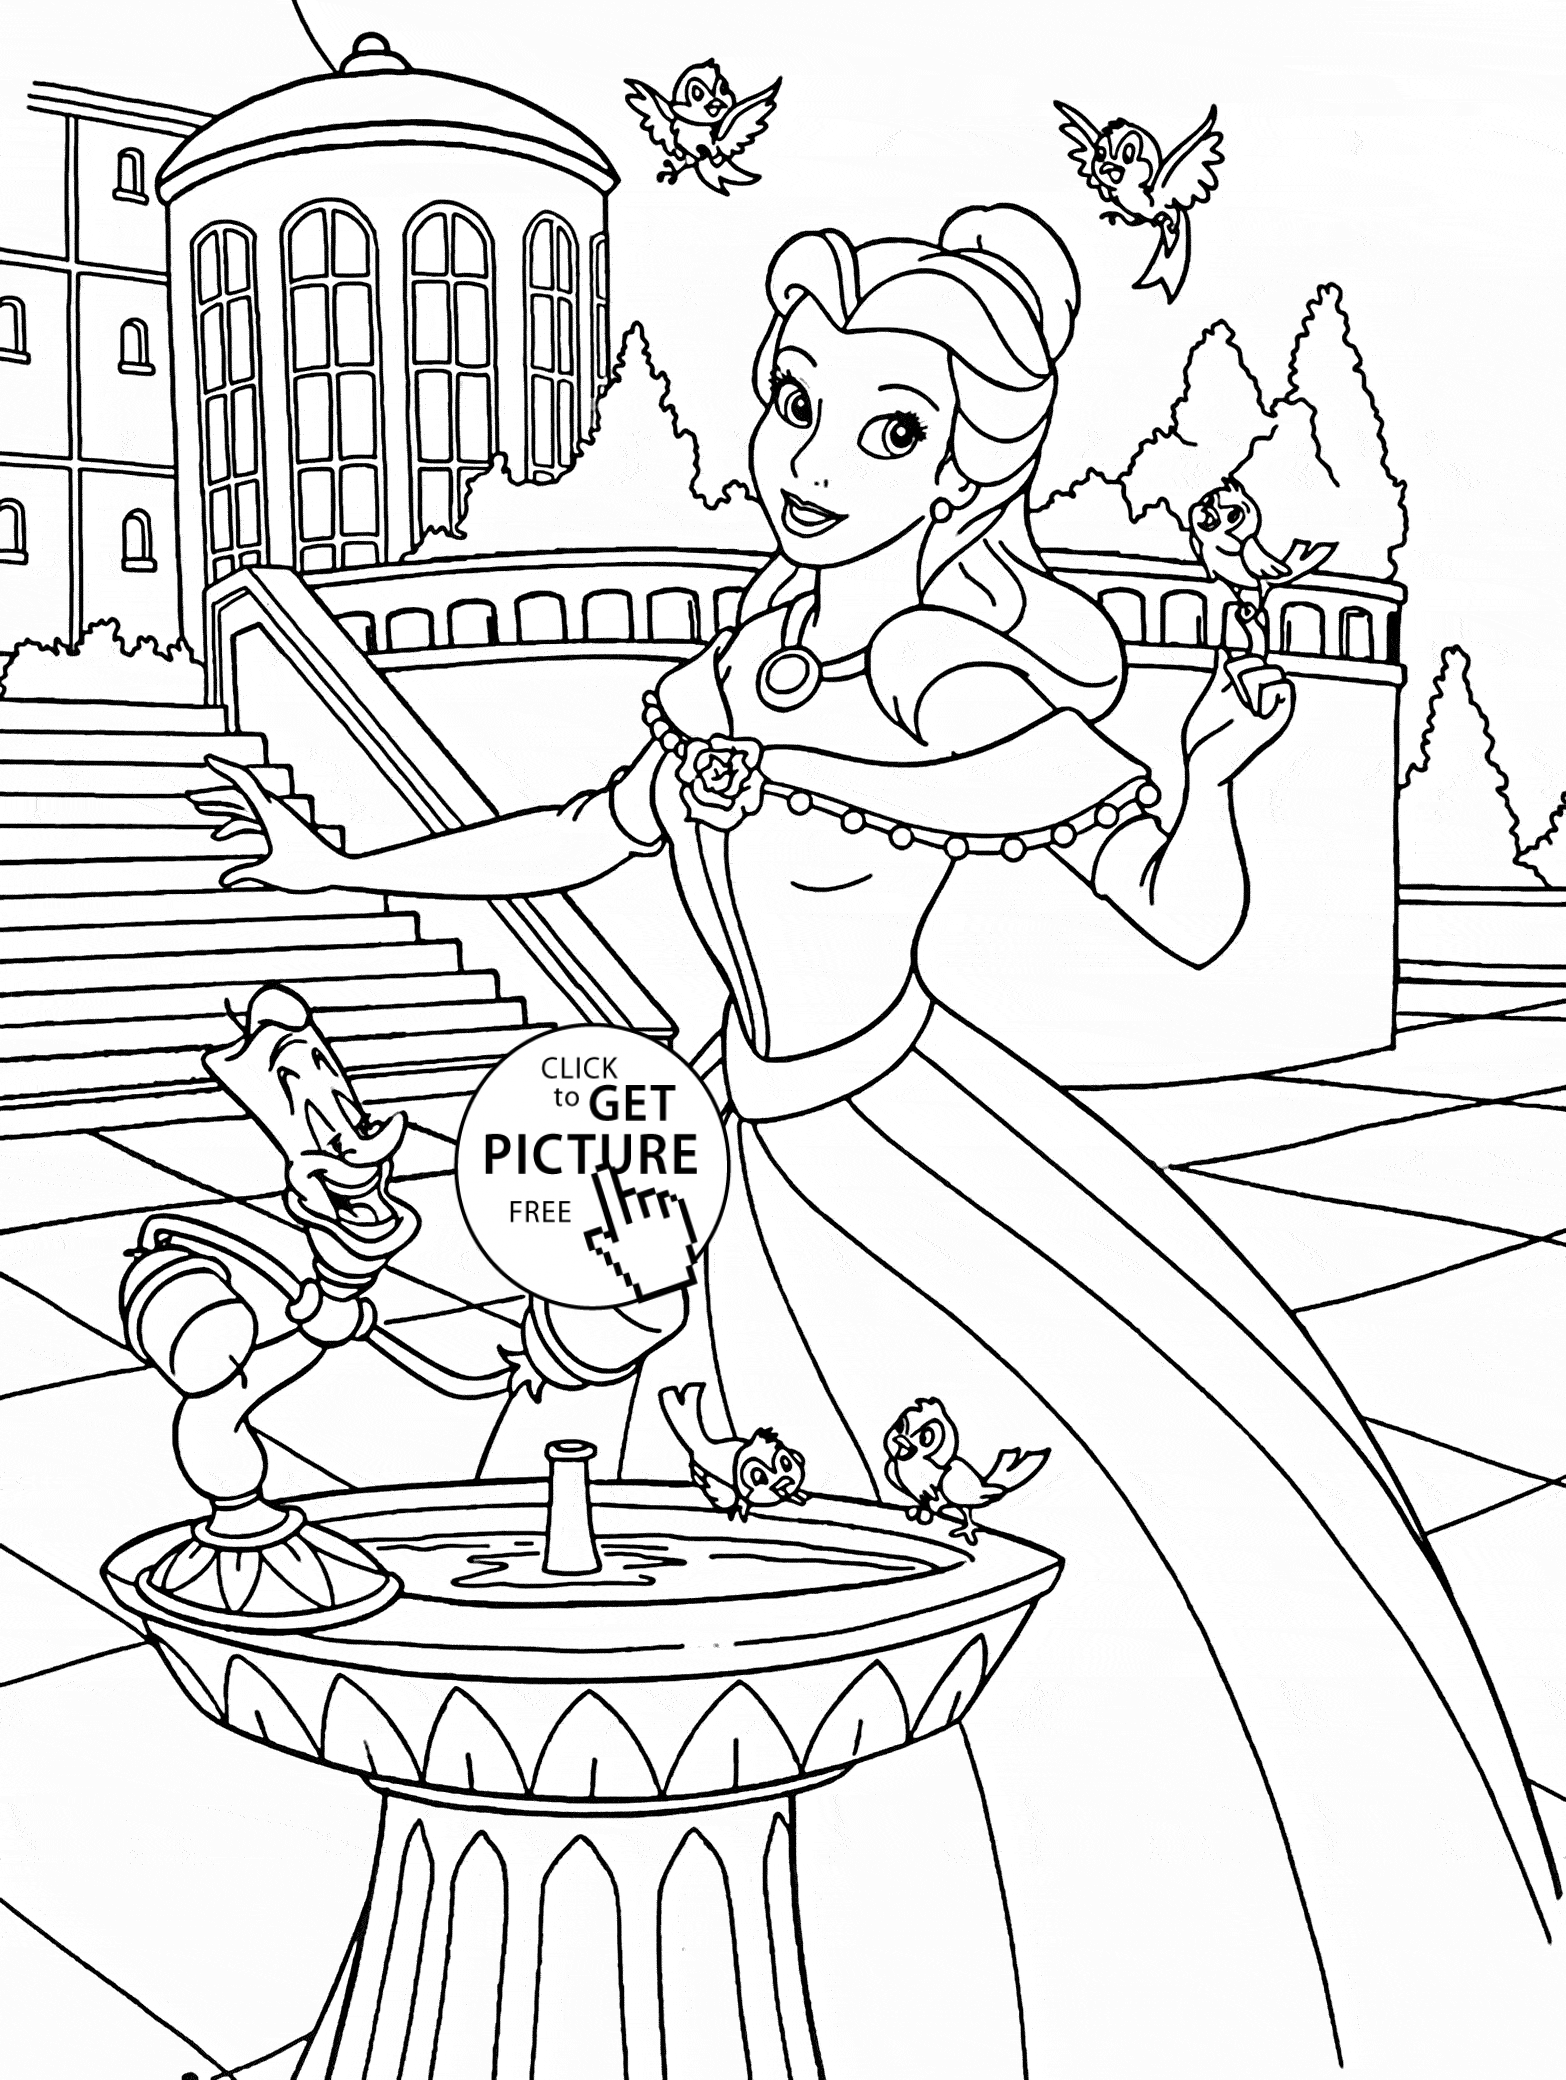 Disneyland Coloring Pages Printable Coloring Pages